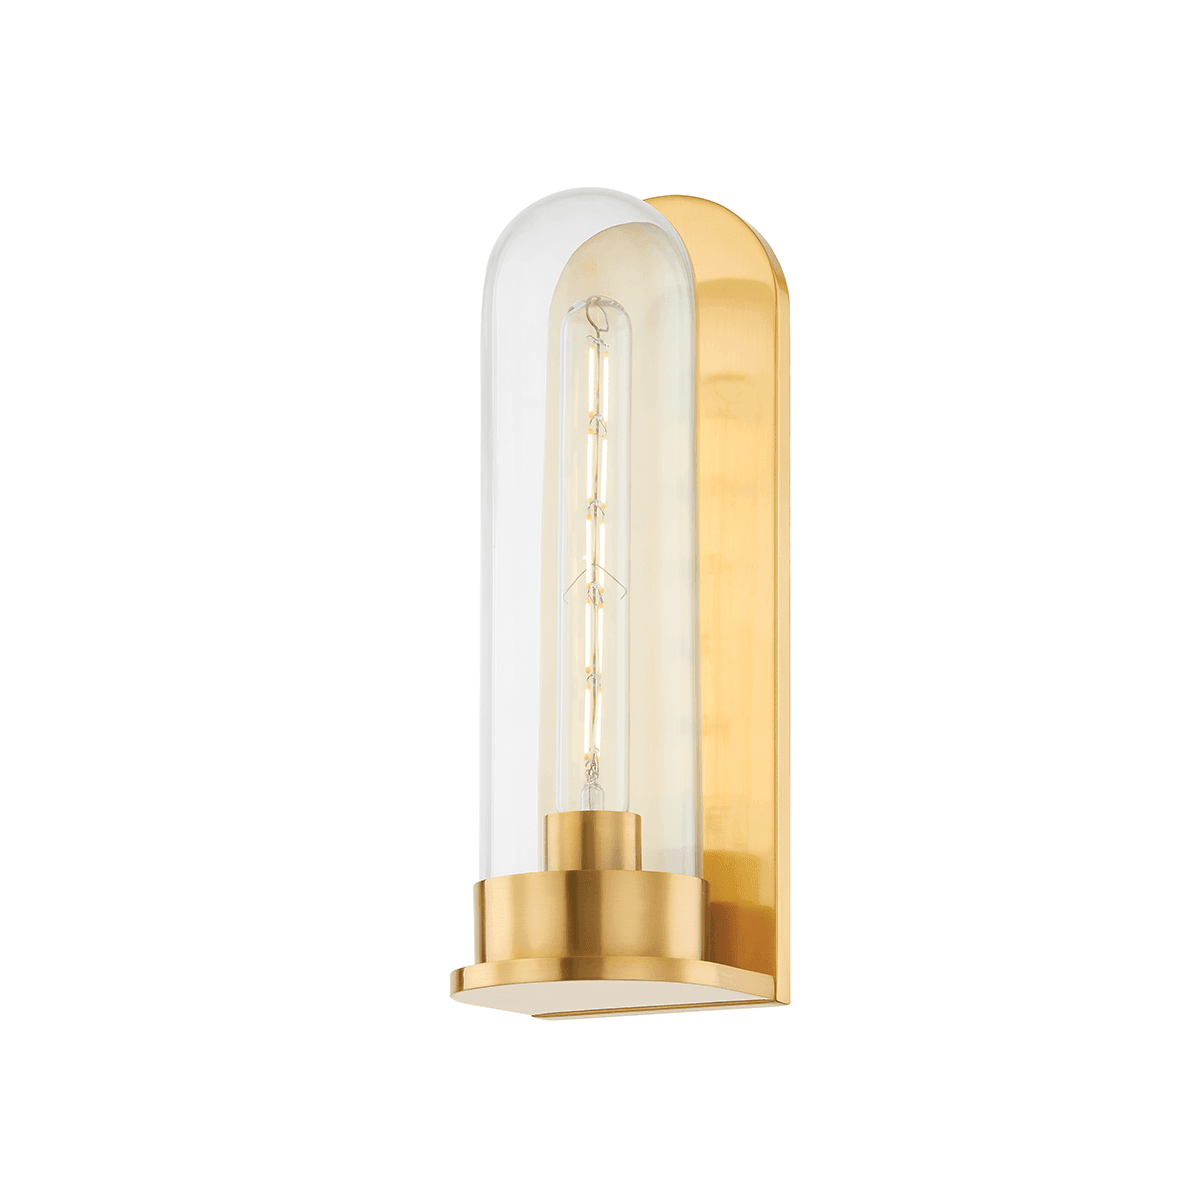 Hudson Valley Lighting - Irwin Wall Sconce - 7800-AGB | Montreal Lighting & Hardware